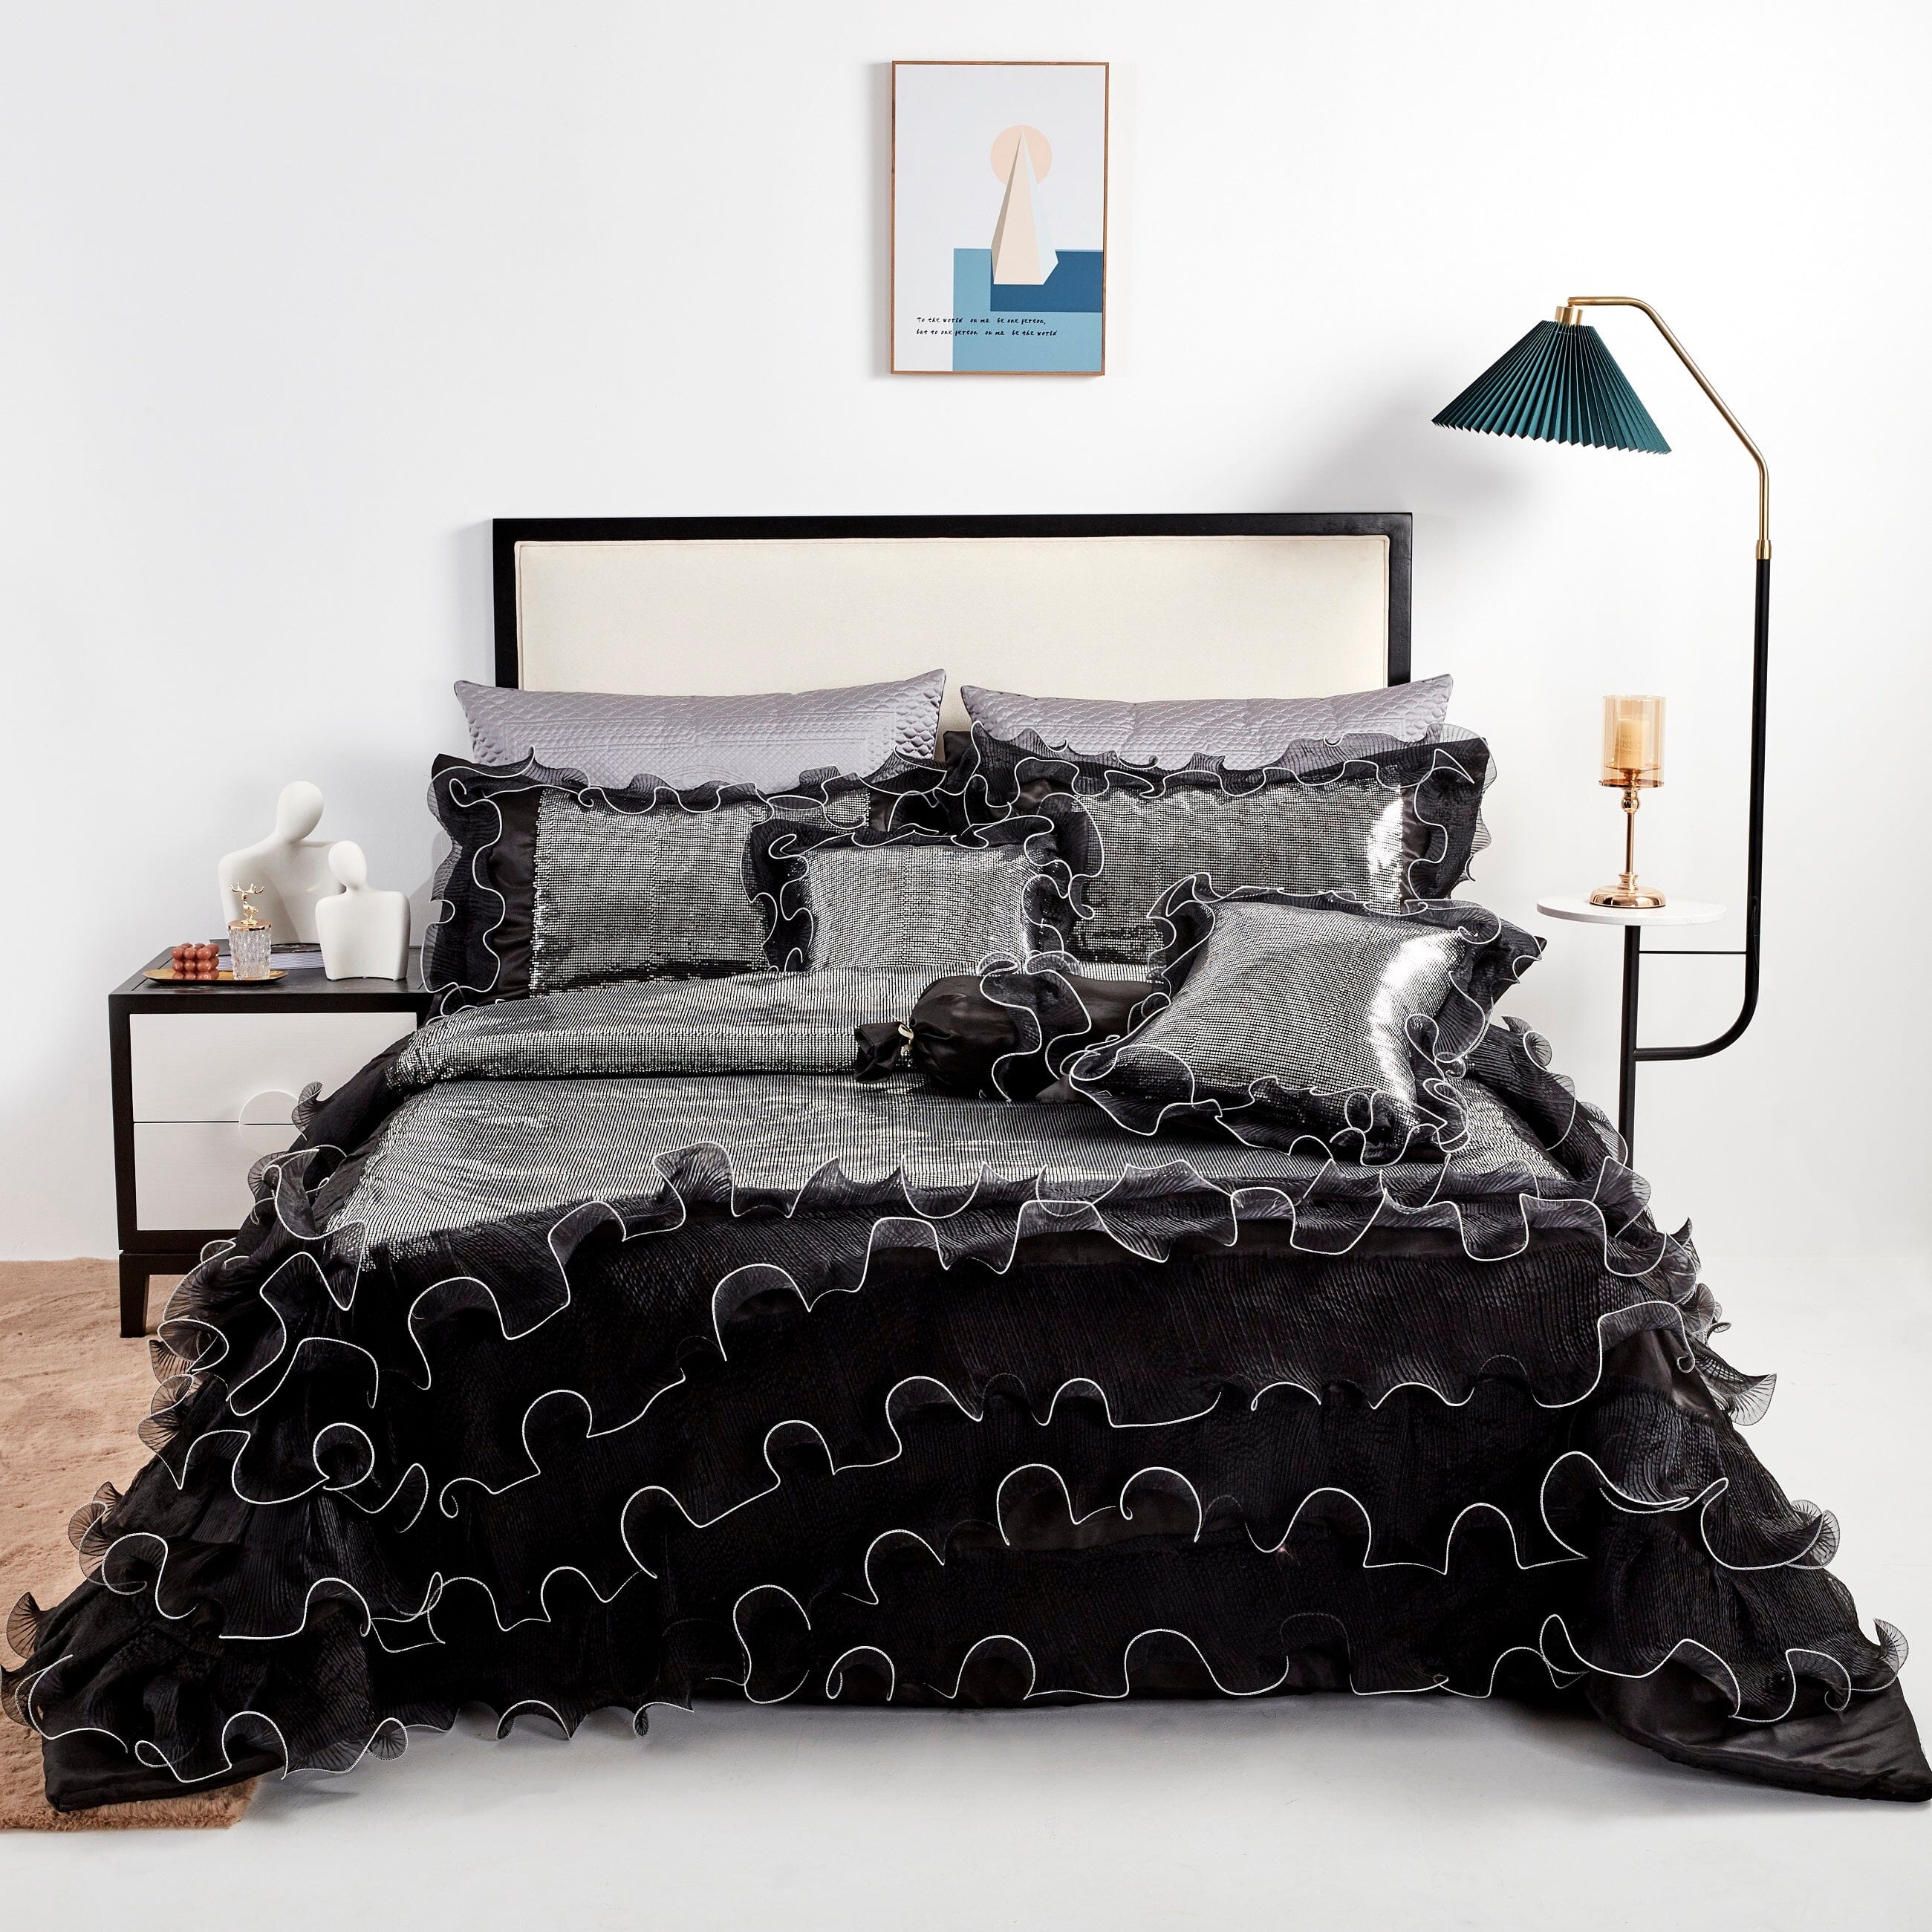 Tache Luxurious Glam Night Out Silver Sequin Black Organza Ruffle 6pc Comforter Bedding Set (1622)